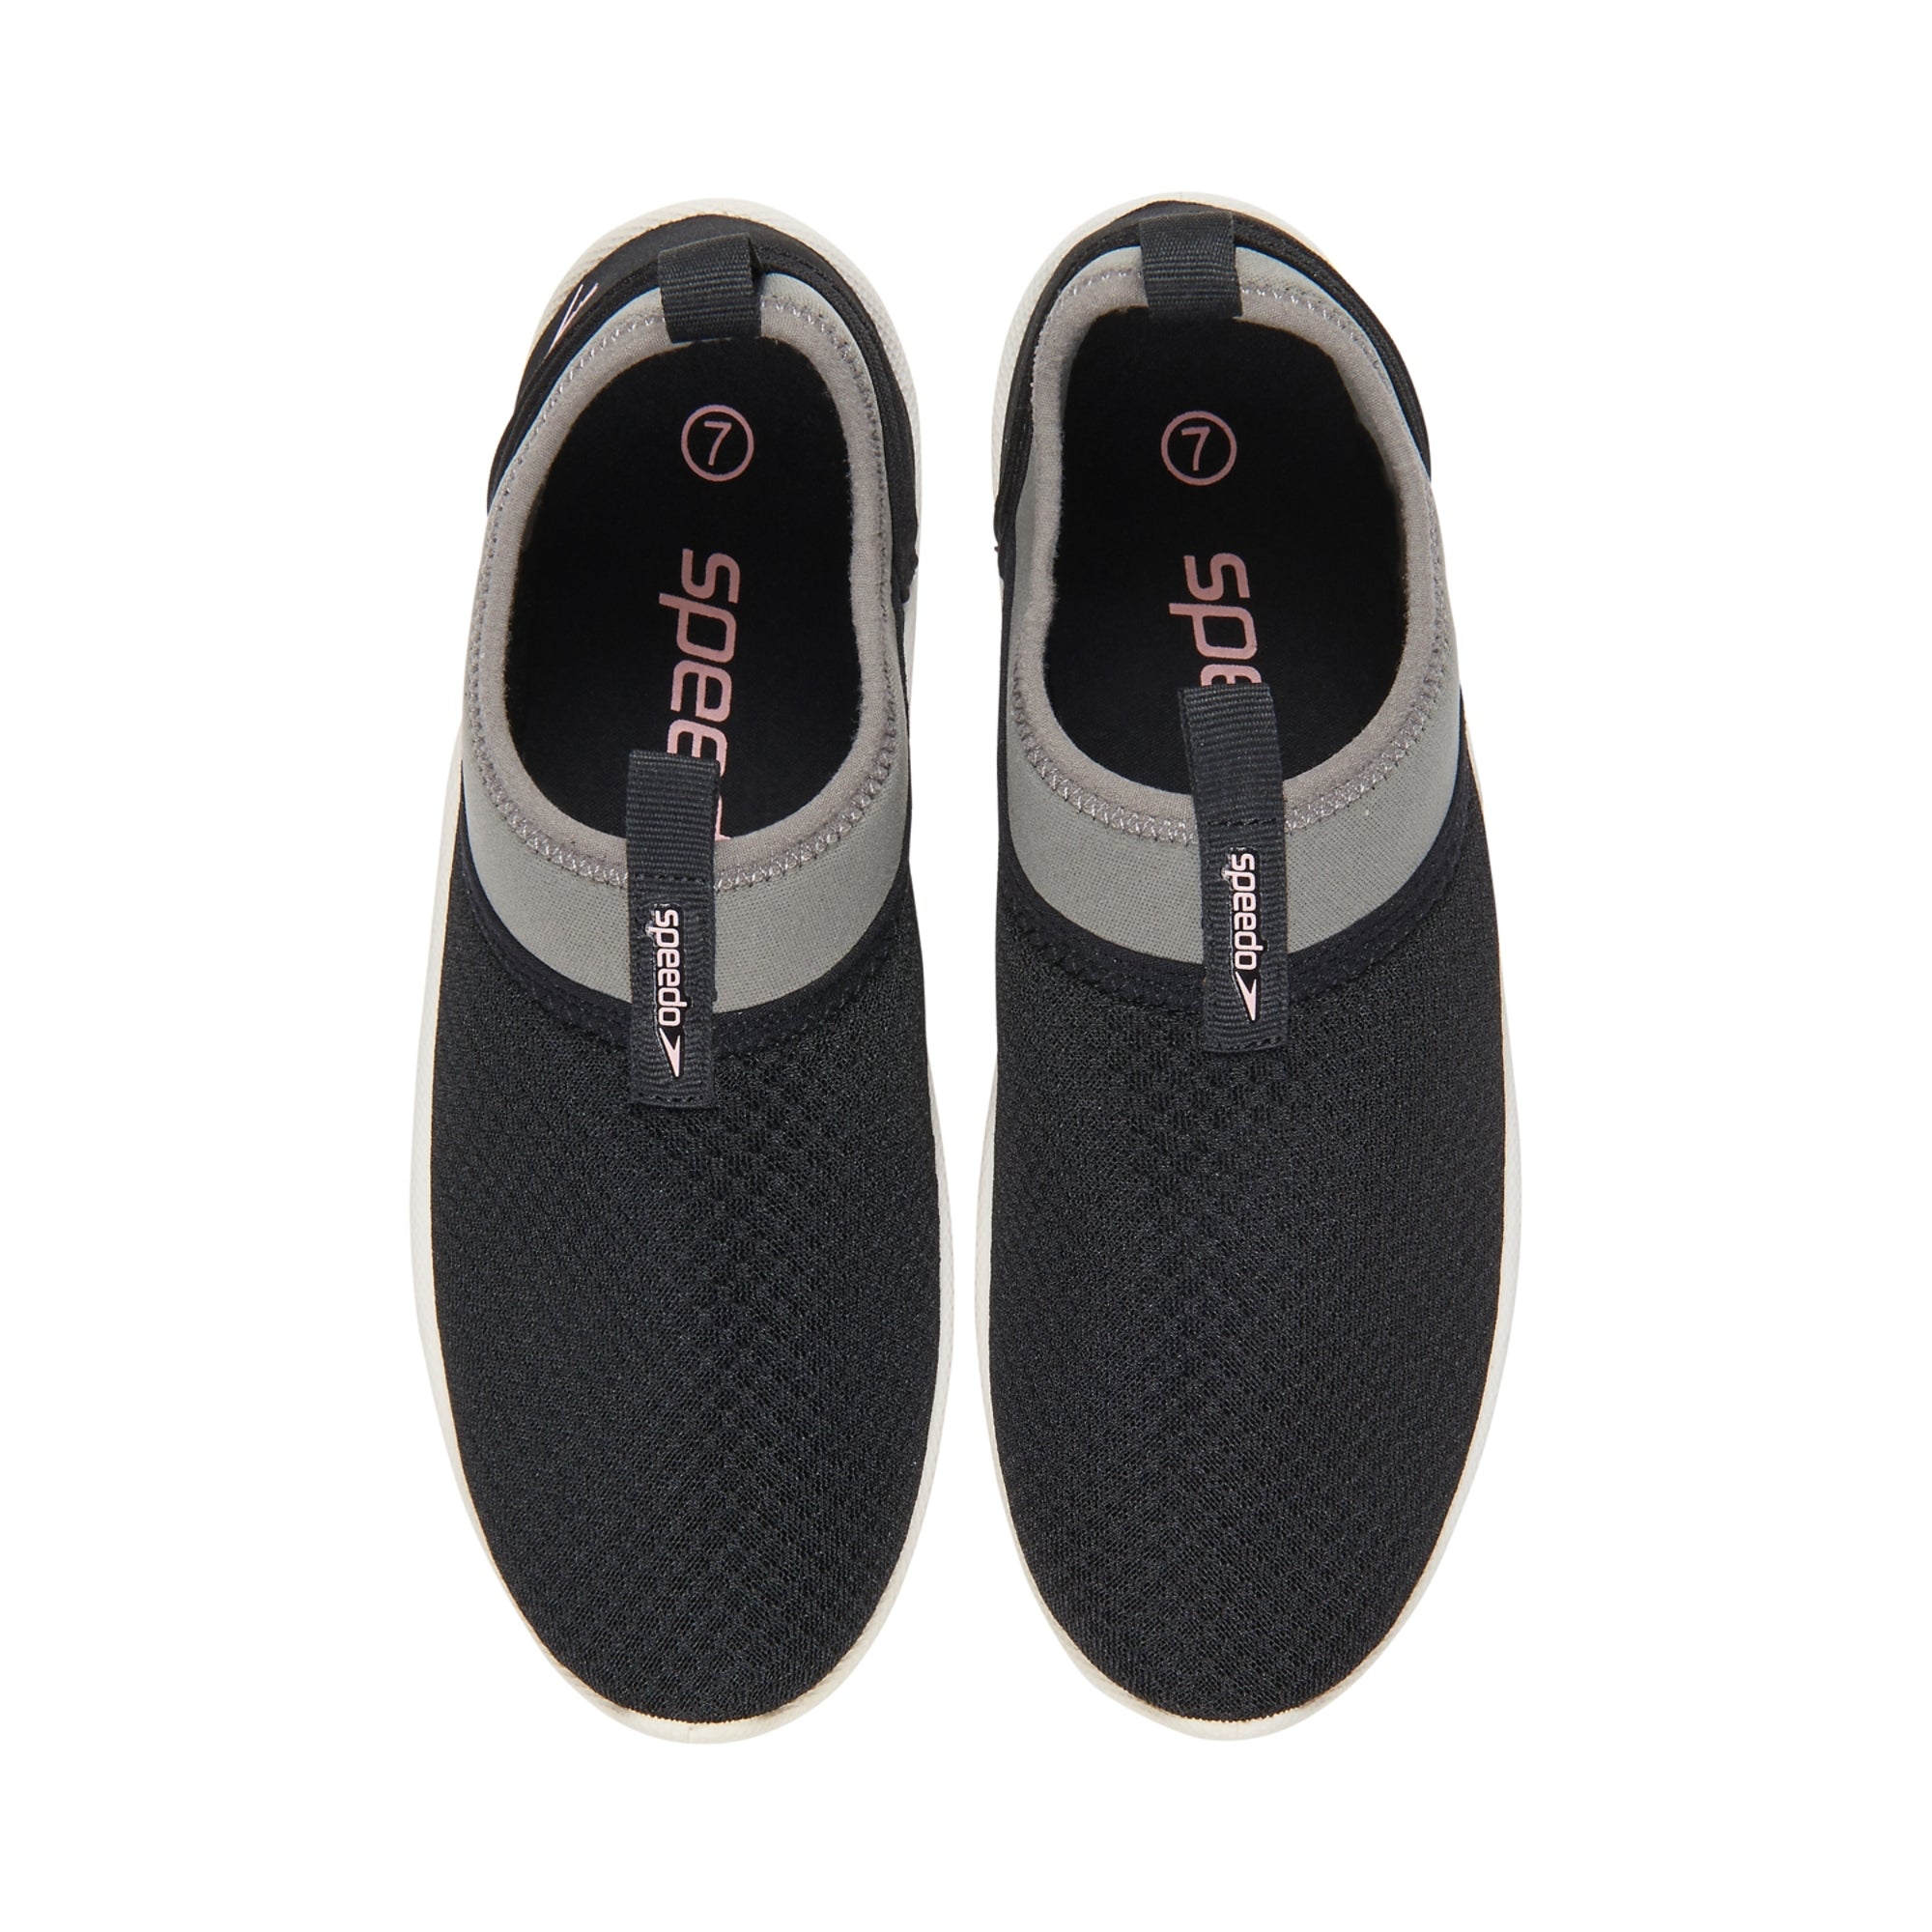 Speedo women's tidal cruiser water shoes These water shoes are perfect from the pool to rocky beaches surfing or paddle boarding. Ventilation fabric on the foot keeps your feet warm while allowing it to dry quickly. For swim use only.